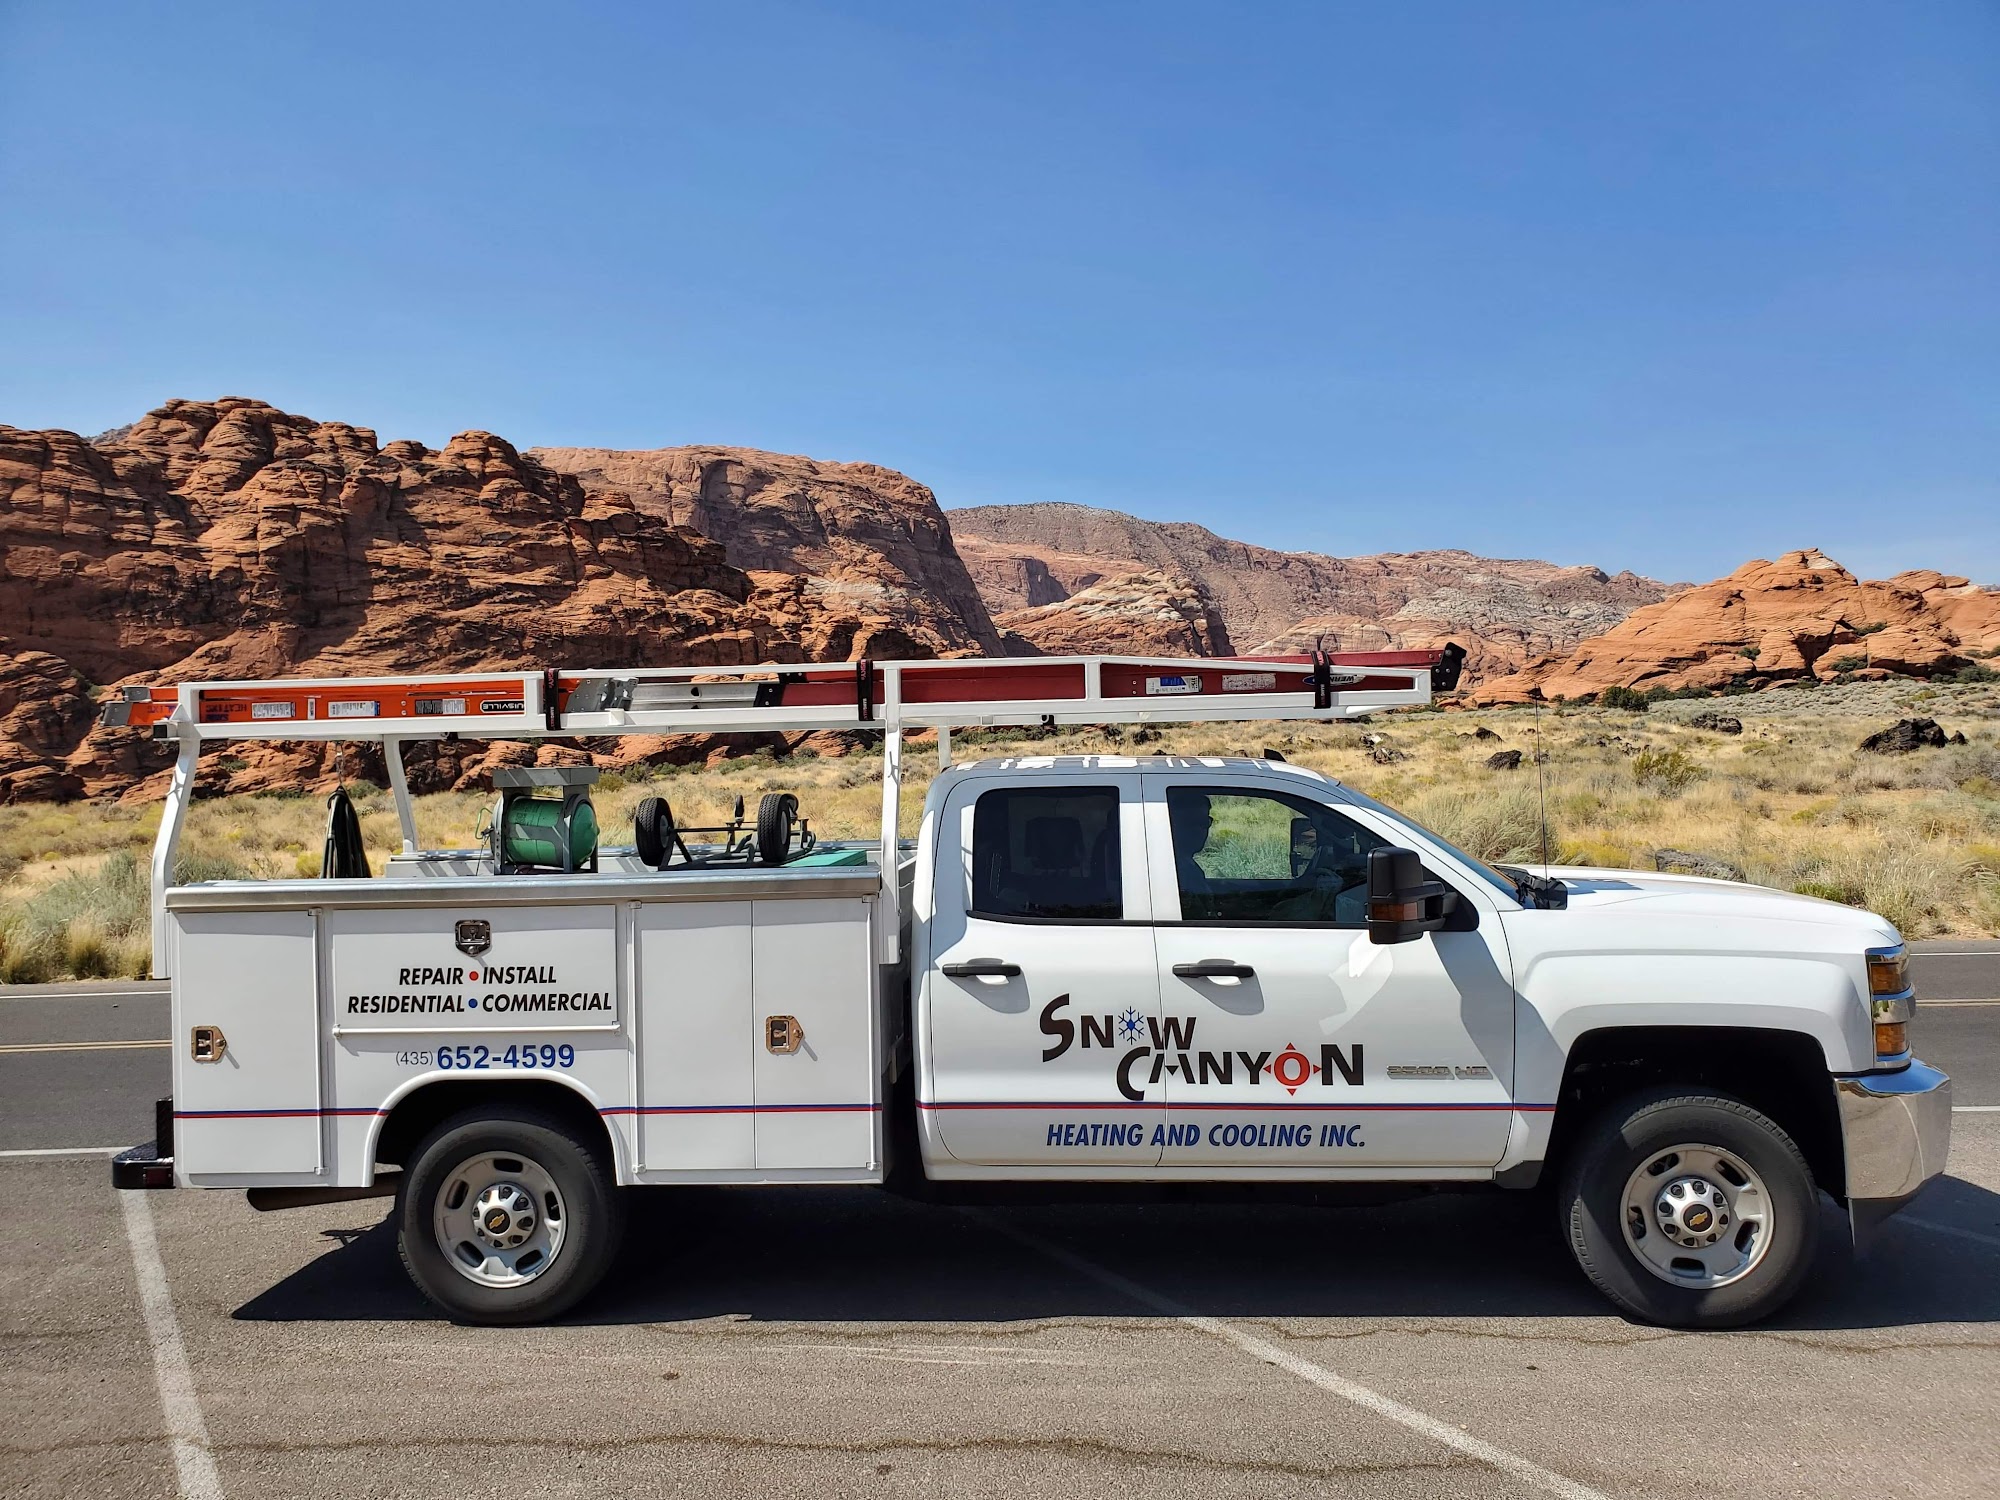 Snow Canyon Heating & Cooling, Inc.